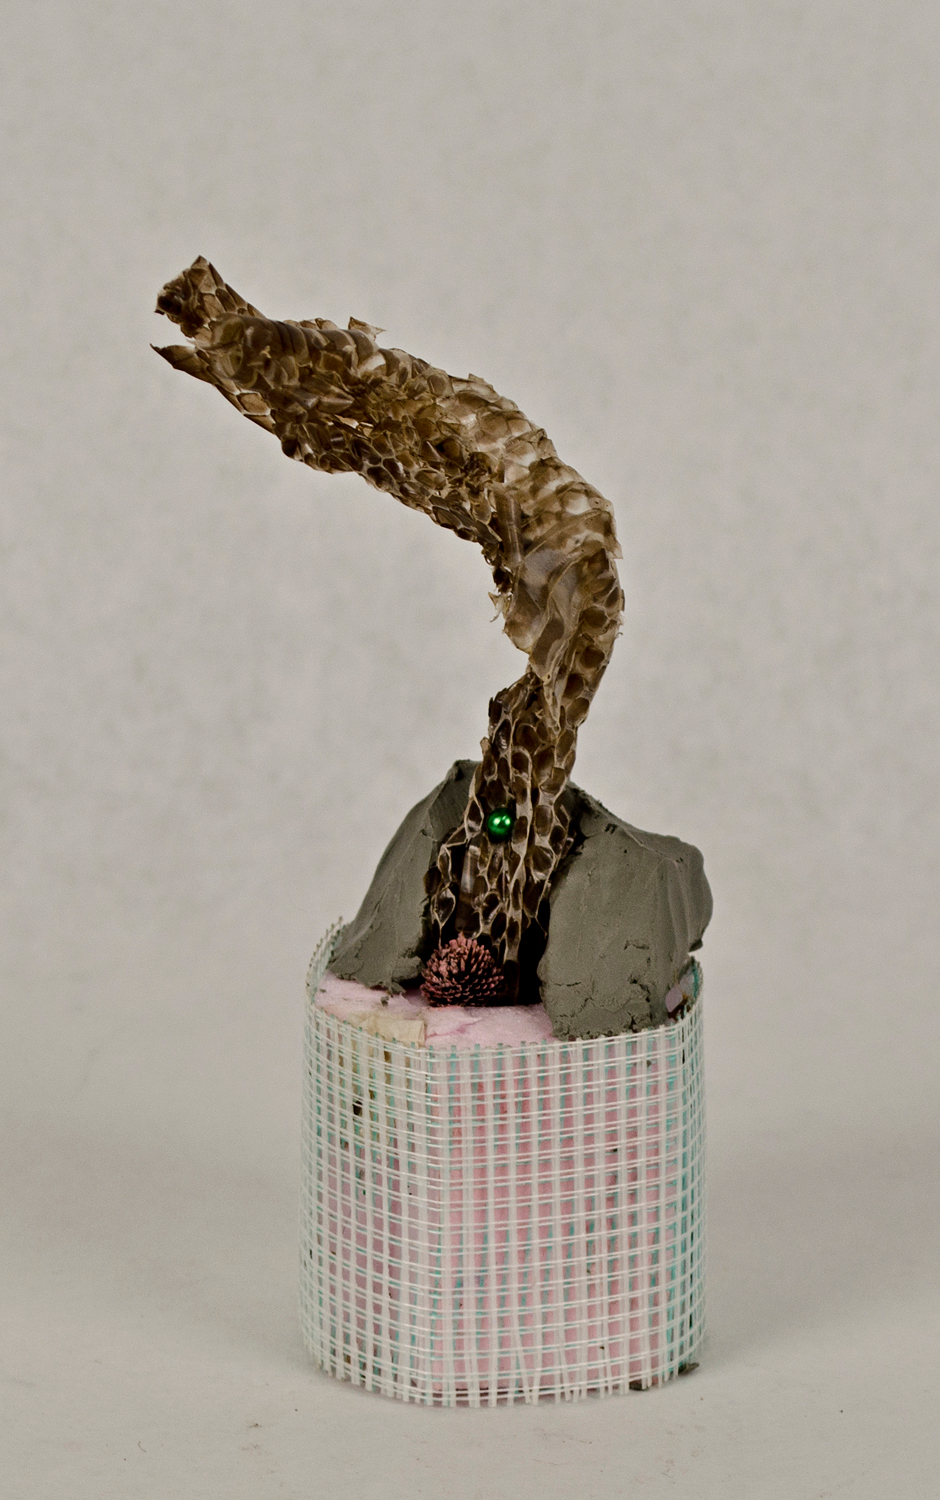 Jessica Lund, charmer, 2015. Foam, drywall tape, clay, snakeskin, flower, pin, paint, 7 x 3 x 3 in.